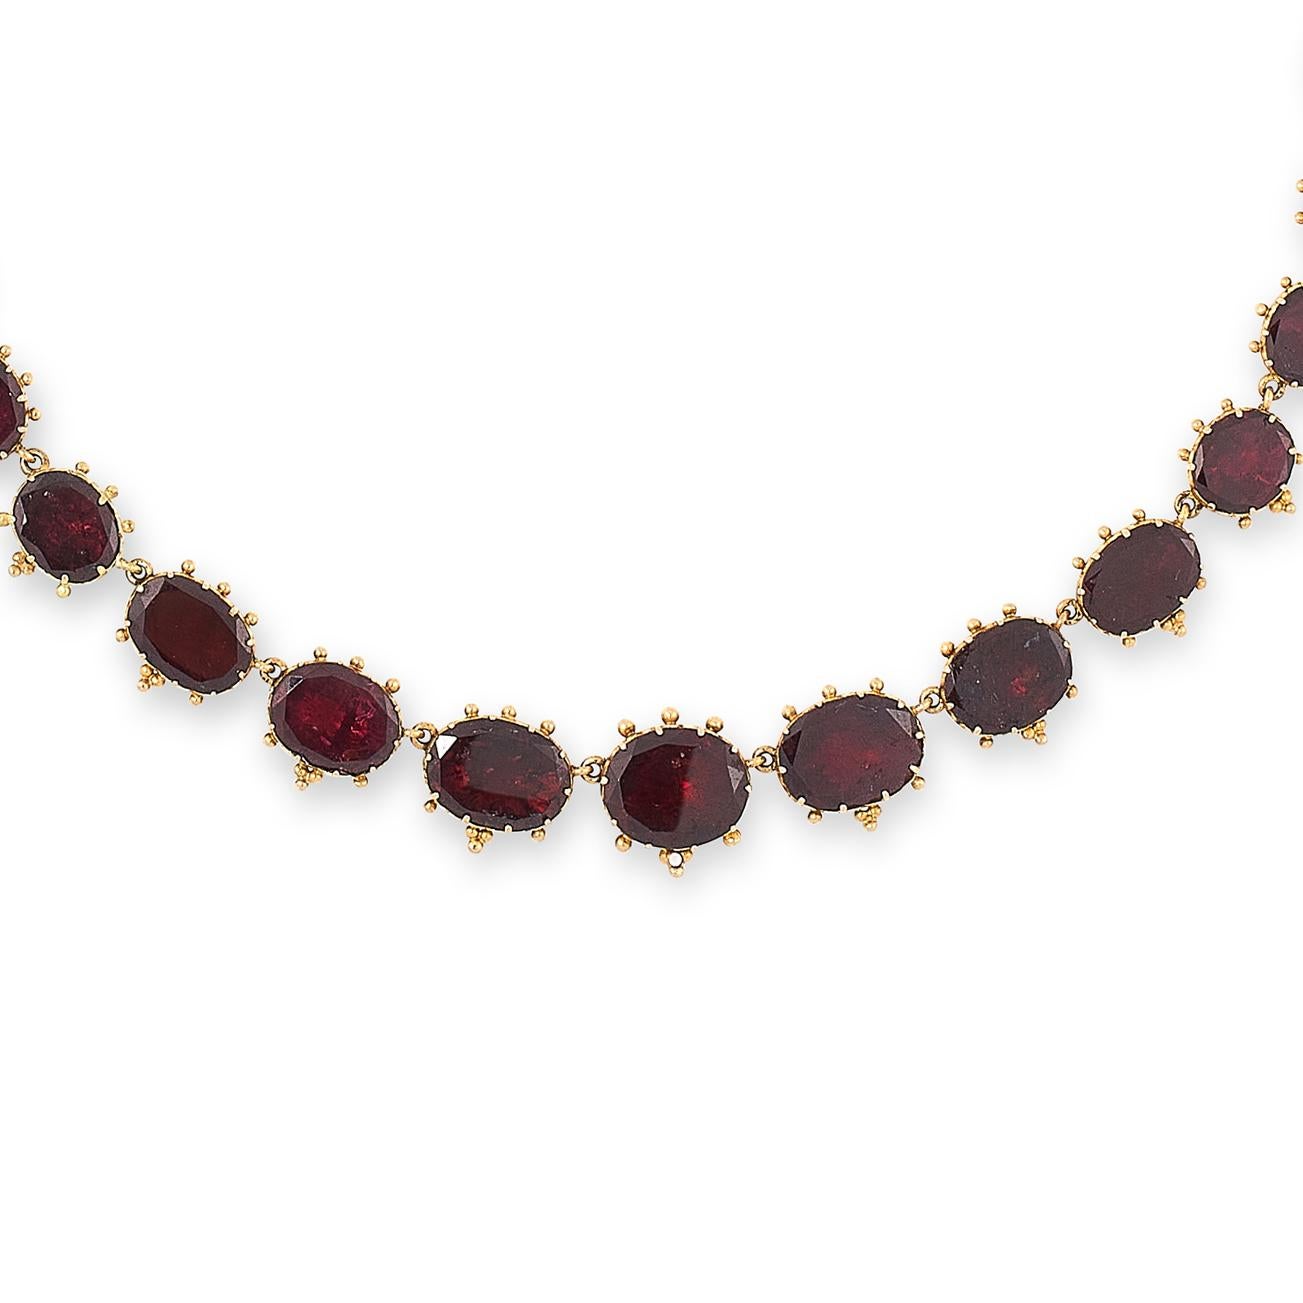 This is a glorious and regal antique garnet rivière necklace mounted in 18 karat yellow gold, comprising a single row of thirty-one graduated flat oval cut garnets, accented by beaded borders, French assay marks.